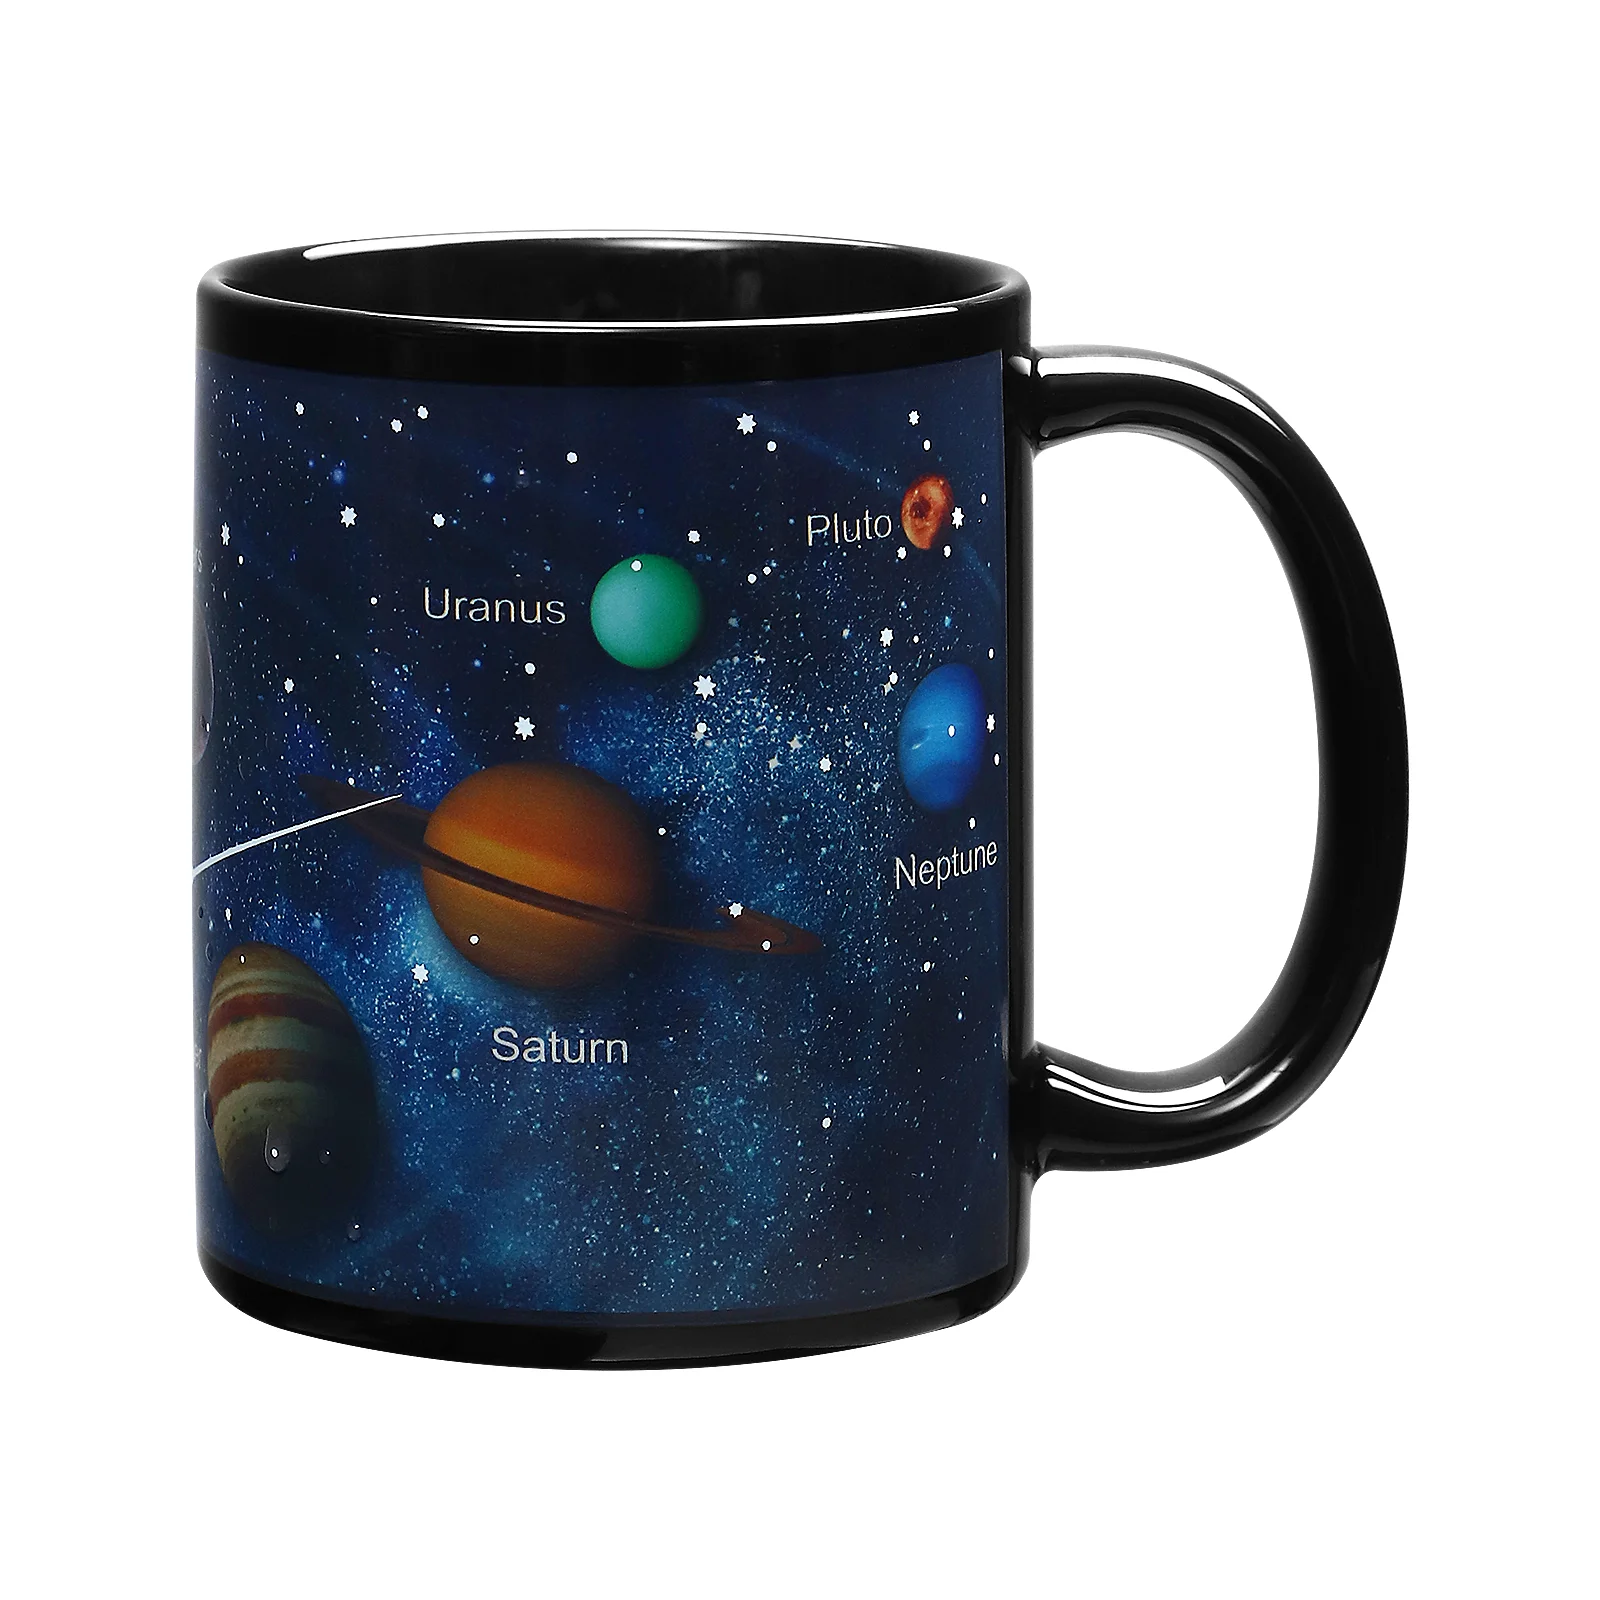 

Drinking Cup Espresso Reactive Heat- Mug Coffee Mugs Solar System Ceramic Color Changing